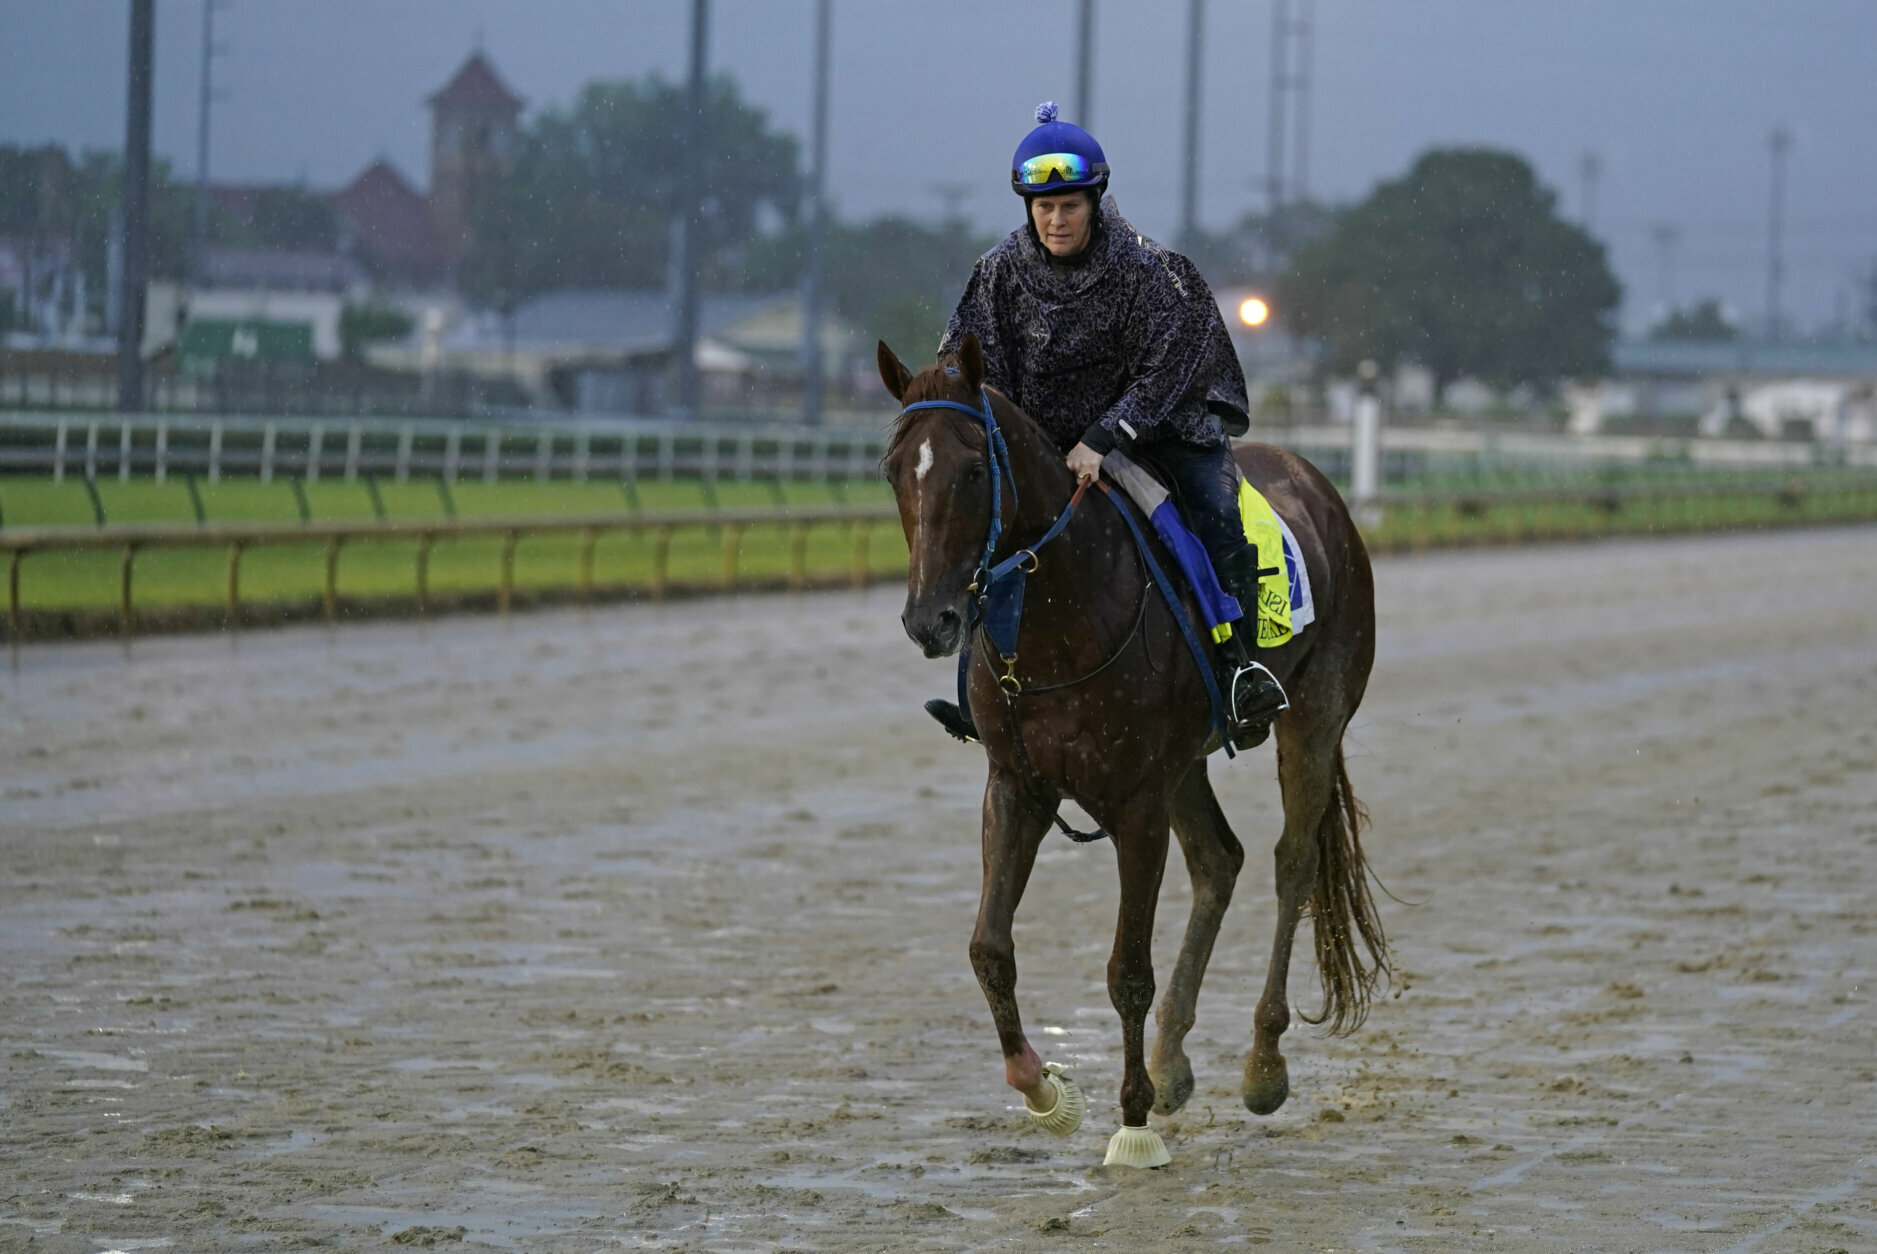 Kentucky Derby entry Necker Island runs during a workout at Churchill Downs, Thursday, Sept. 3, 2020, in Louisville, Ky. The Kentucky Derby is scheduled for Saturday, Sept. 5th. (AP Photo/Darron Cummings)